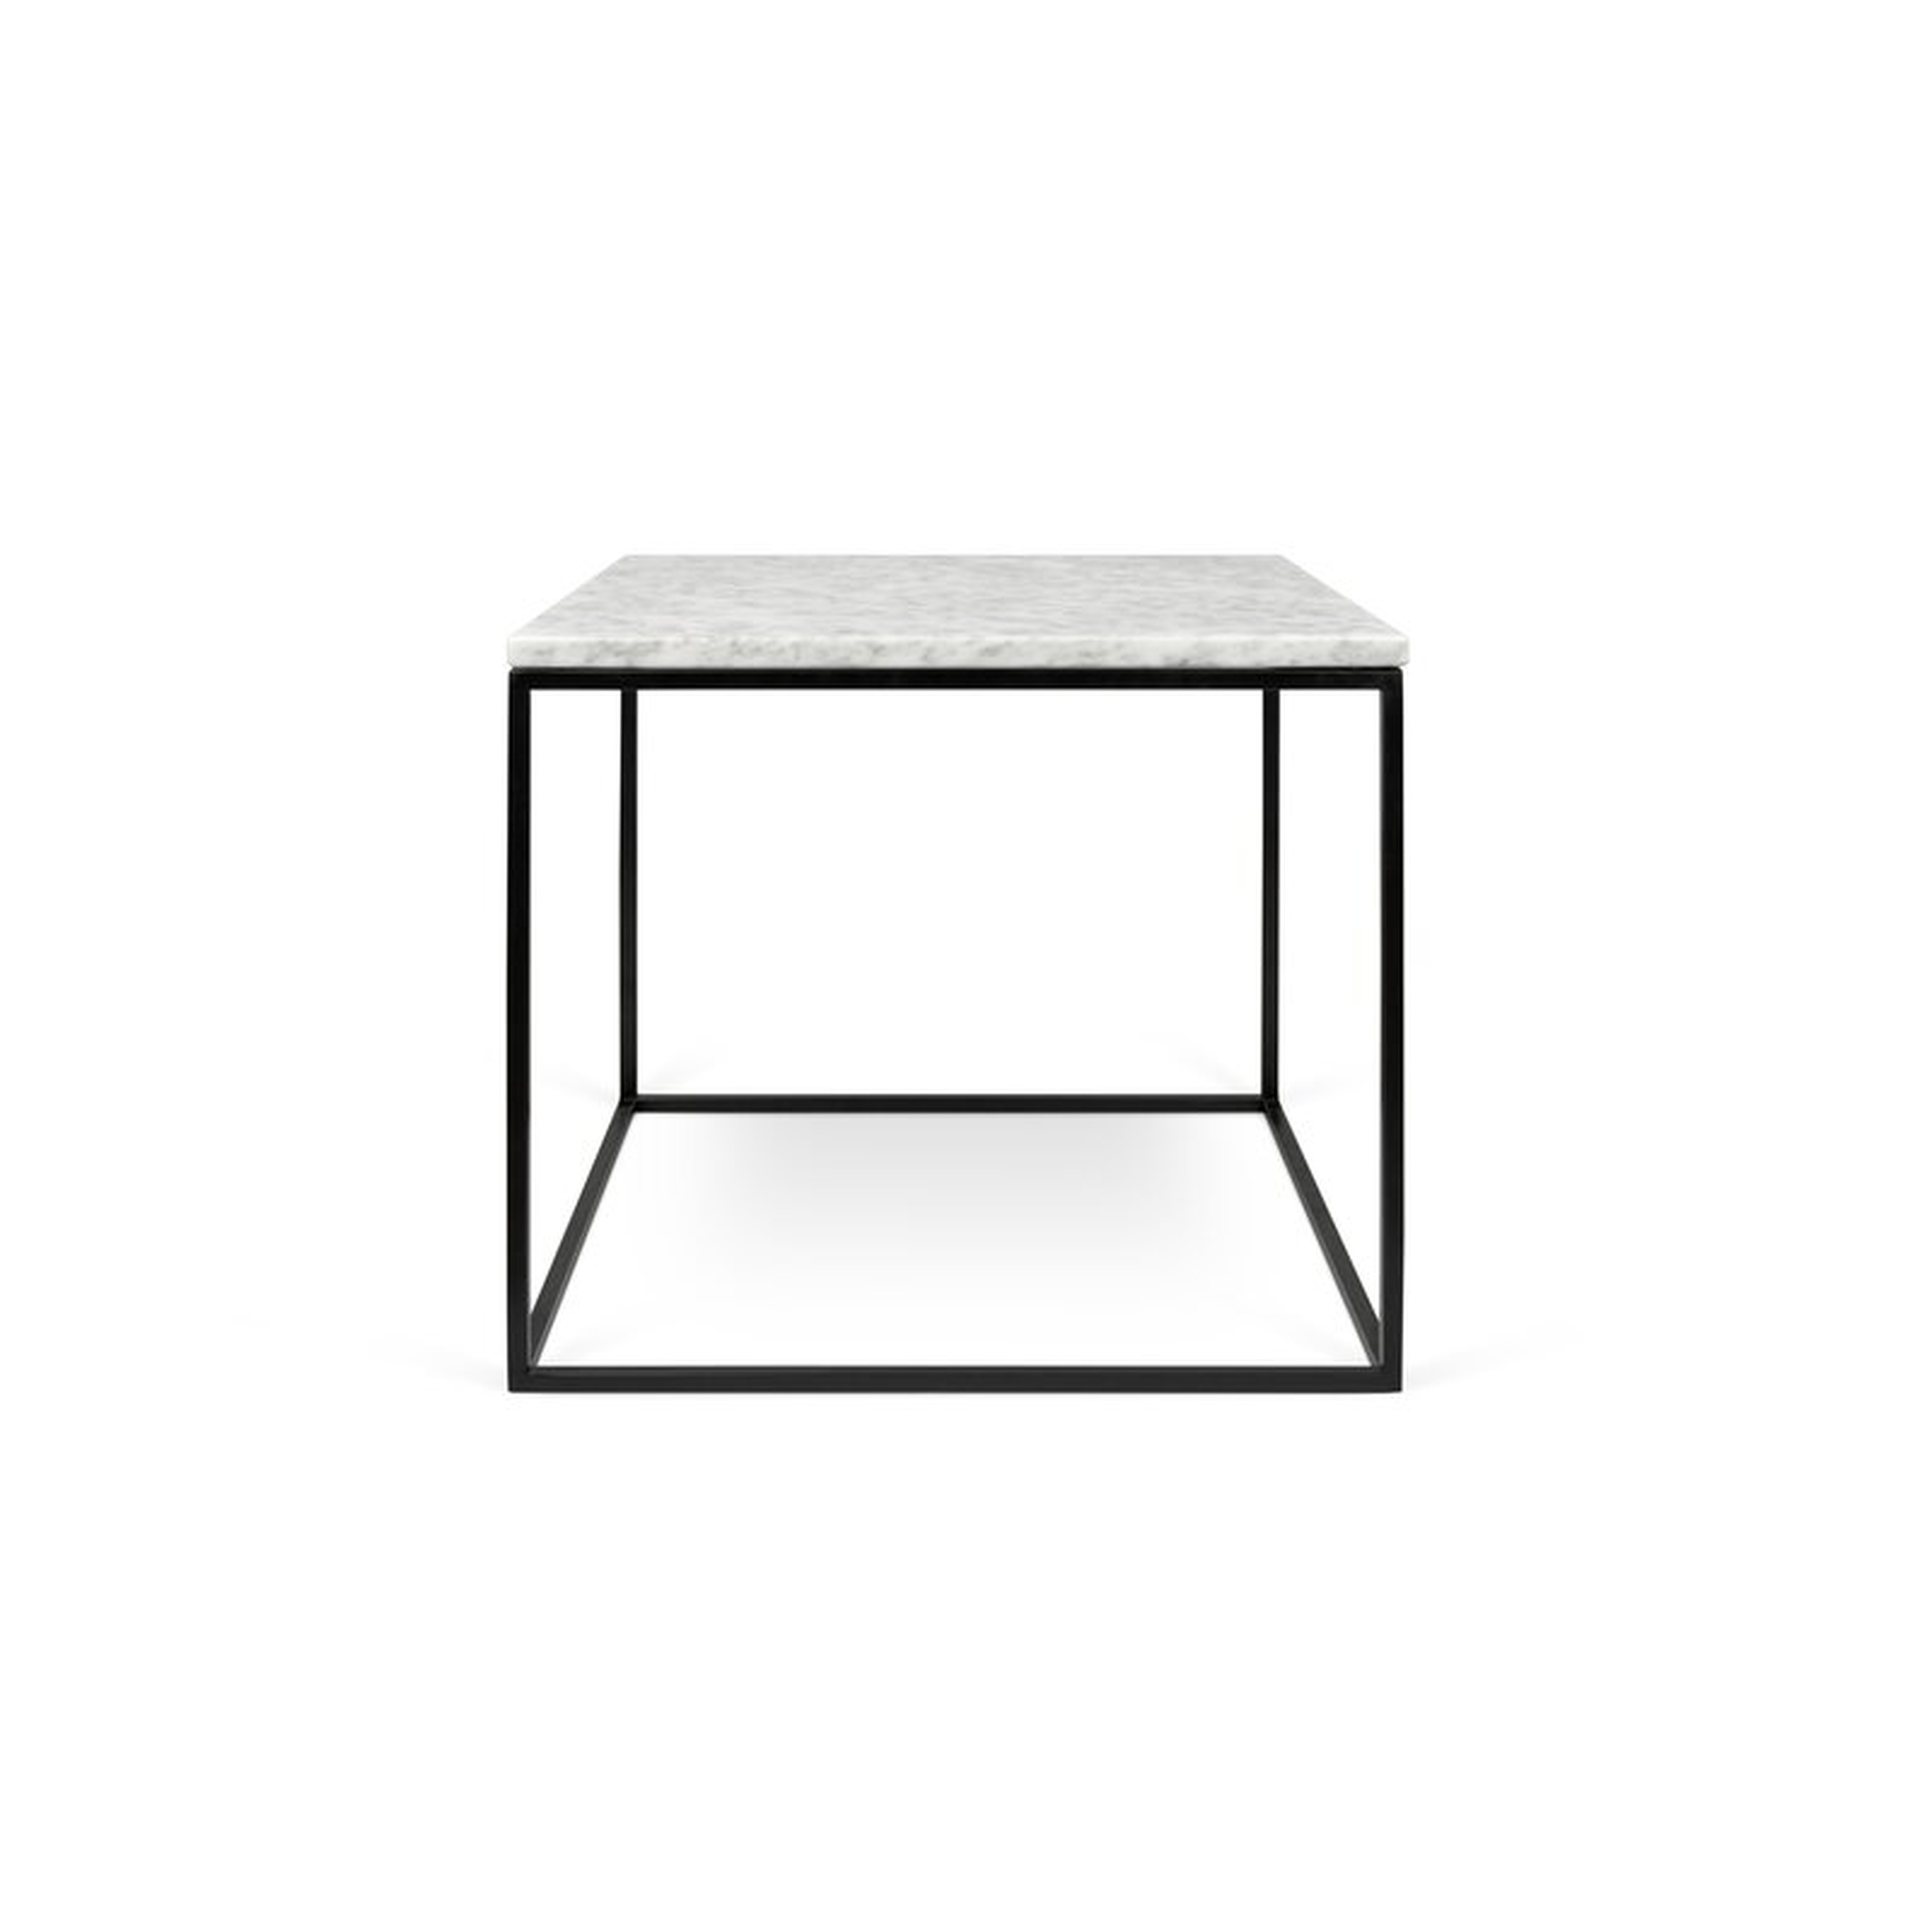 Gleam End Table Base Color: Black Lacquered Steel, Top Color: White Marble - Perigold